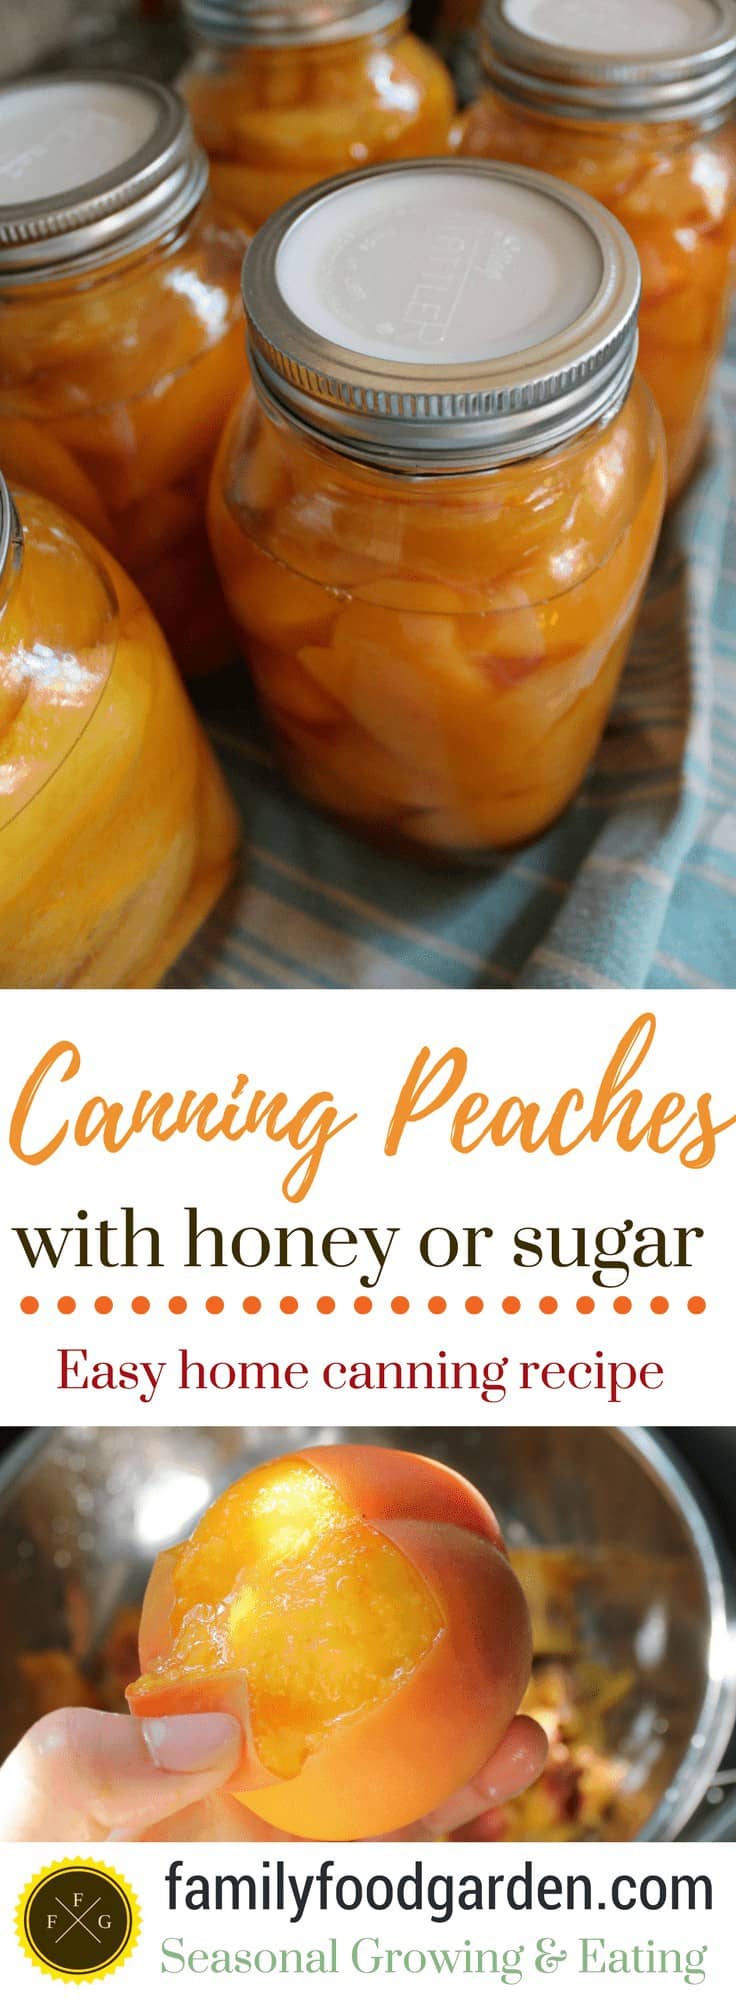 Canning Peaches in Honey or Sugar